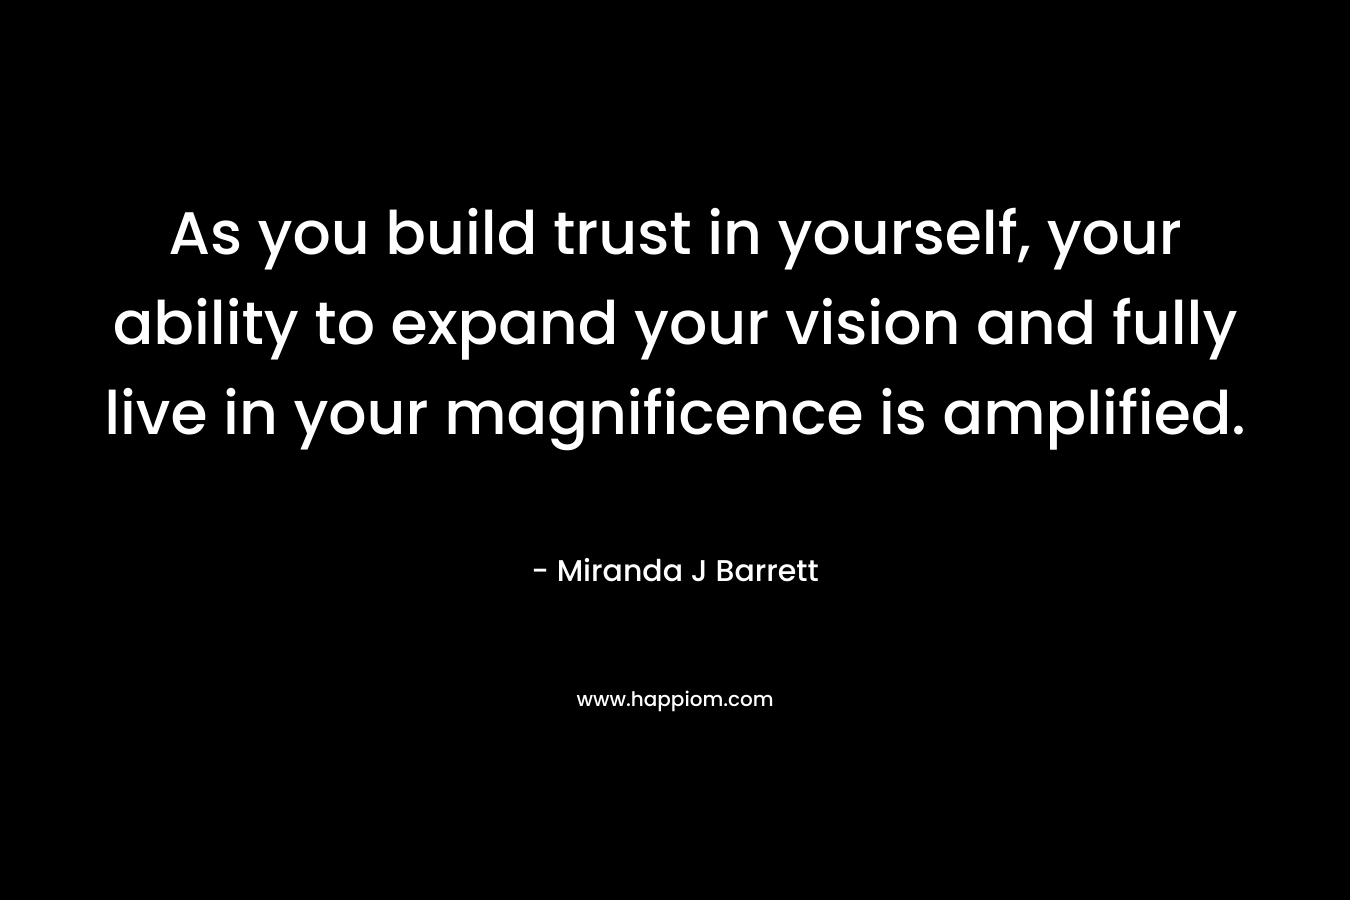 As you build trust in yourself, your ability to expand your vision and fully live in your magnificence is amplified.